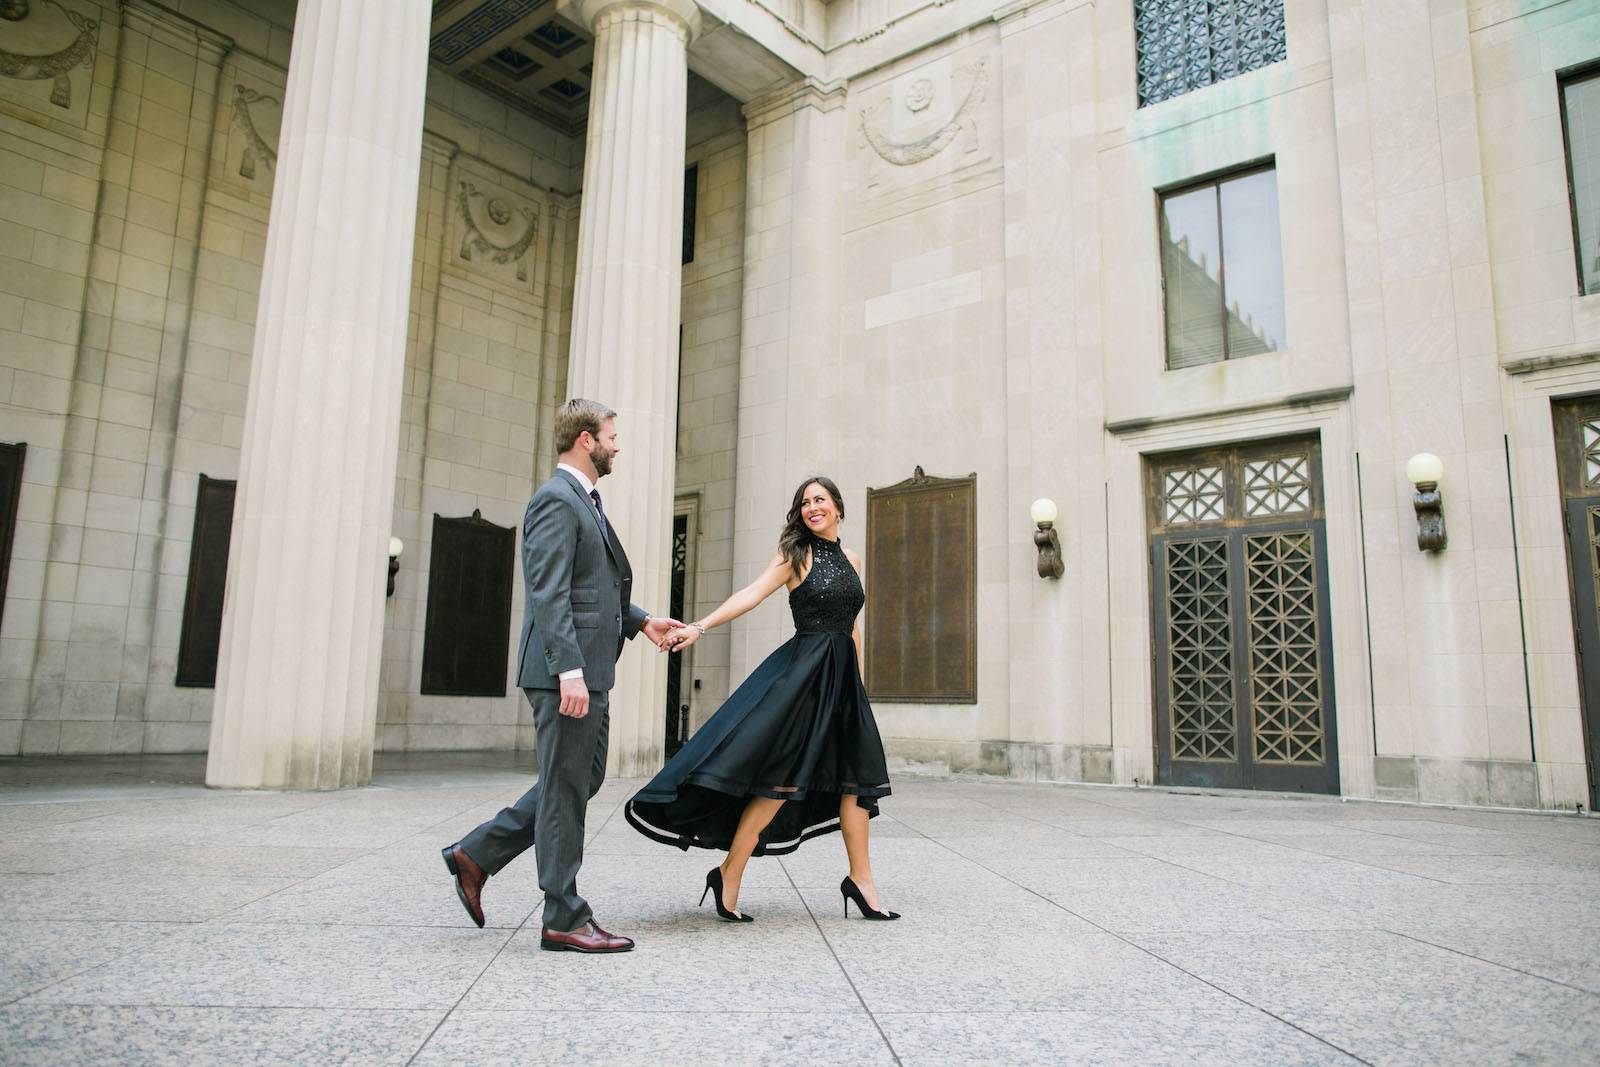 Alex + David’s Classic Meets Quirky Downtown Nashville Engagement Session by SheHeWe Photography |  Nashville